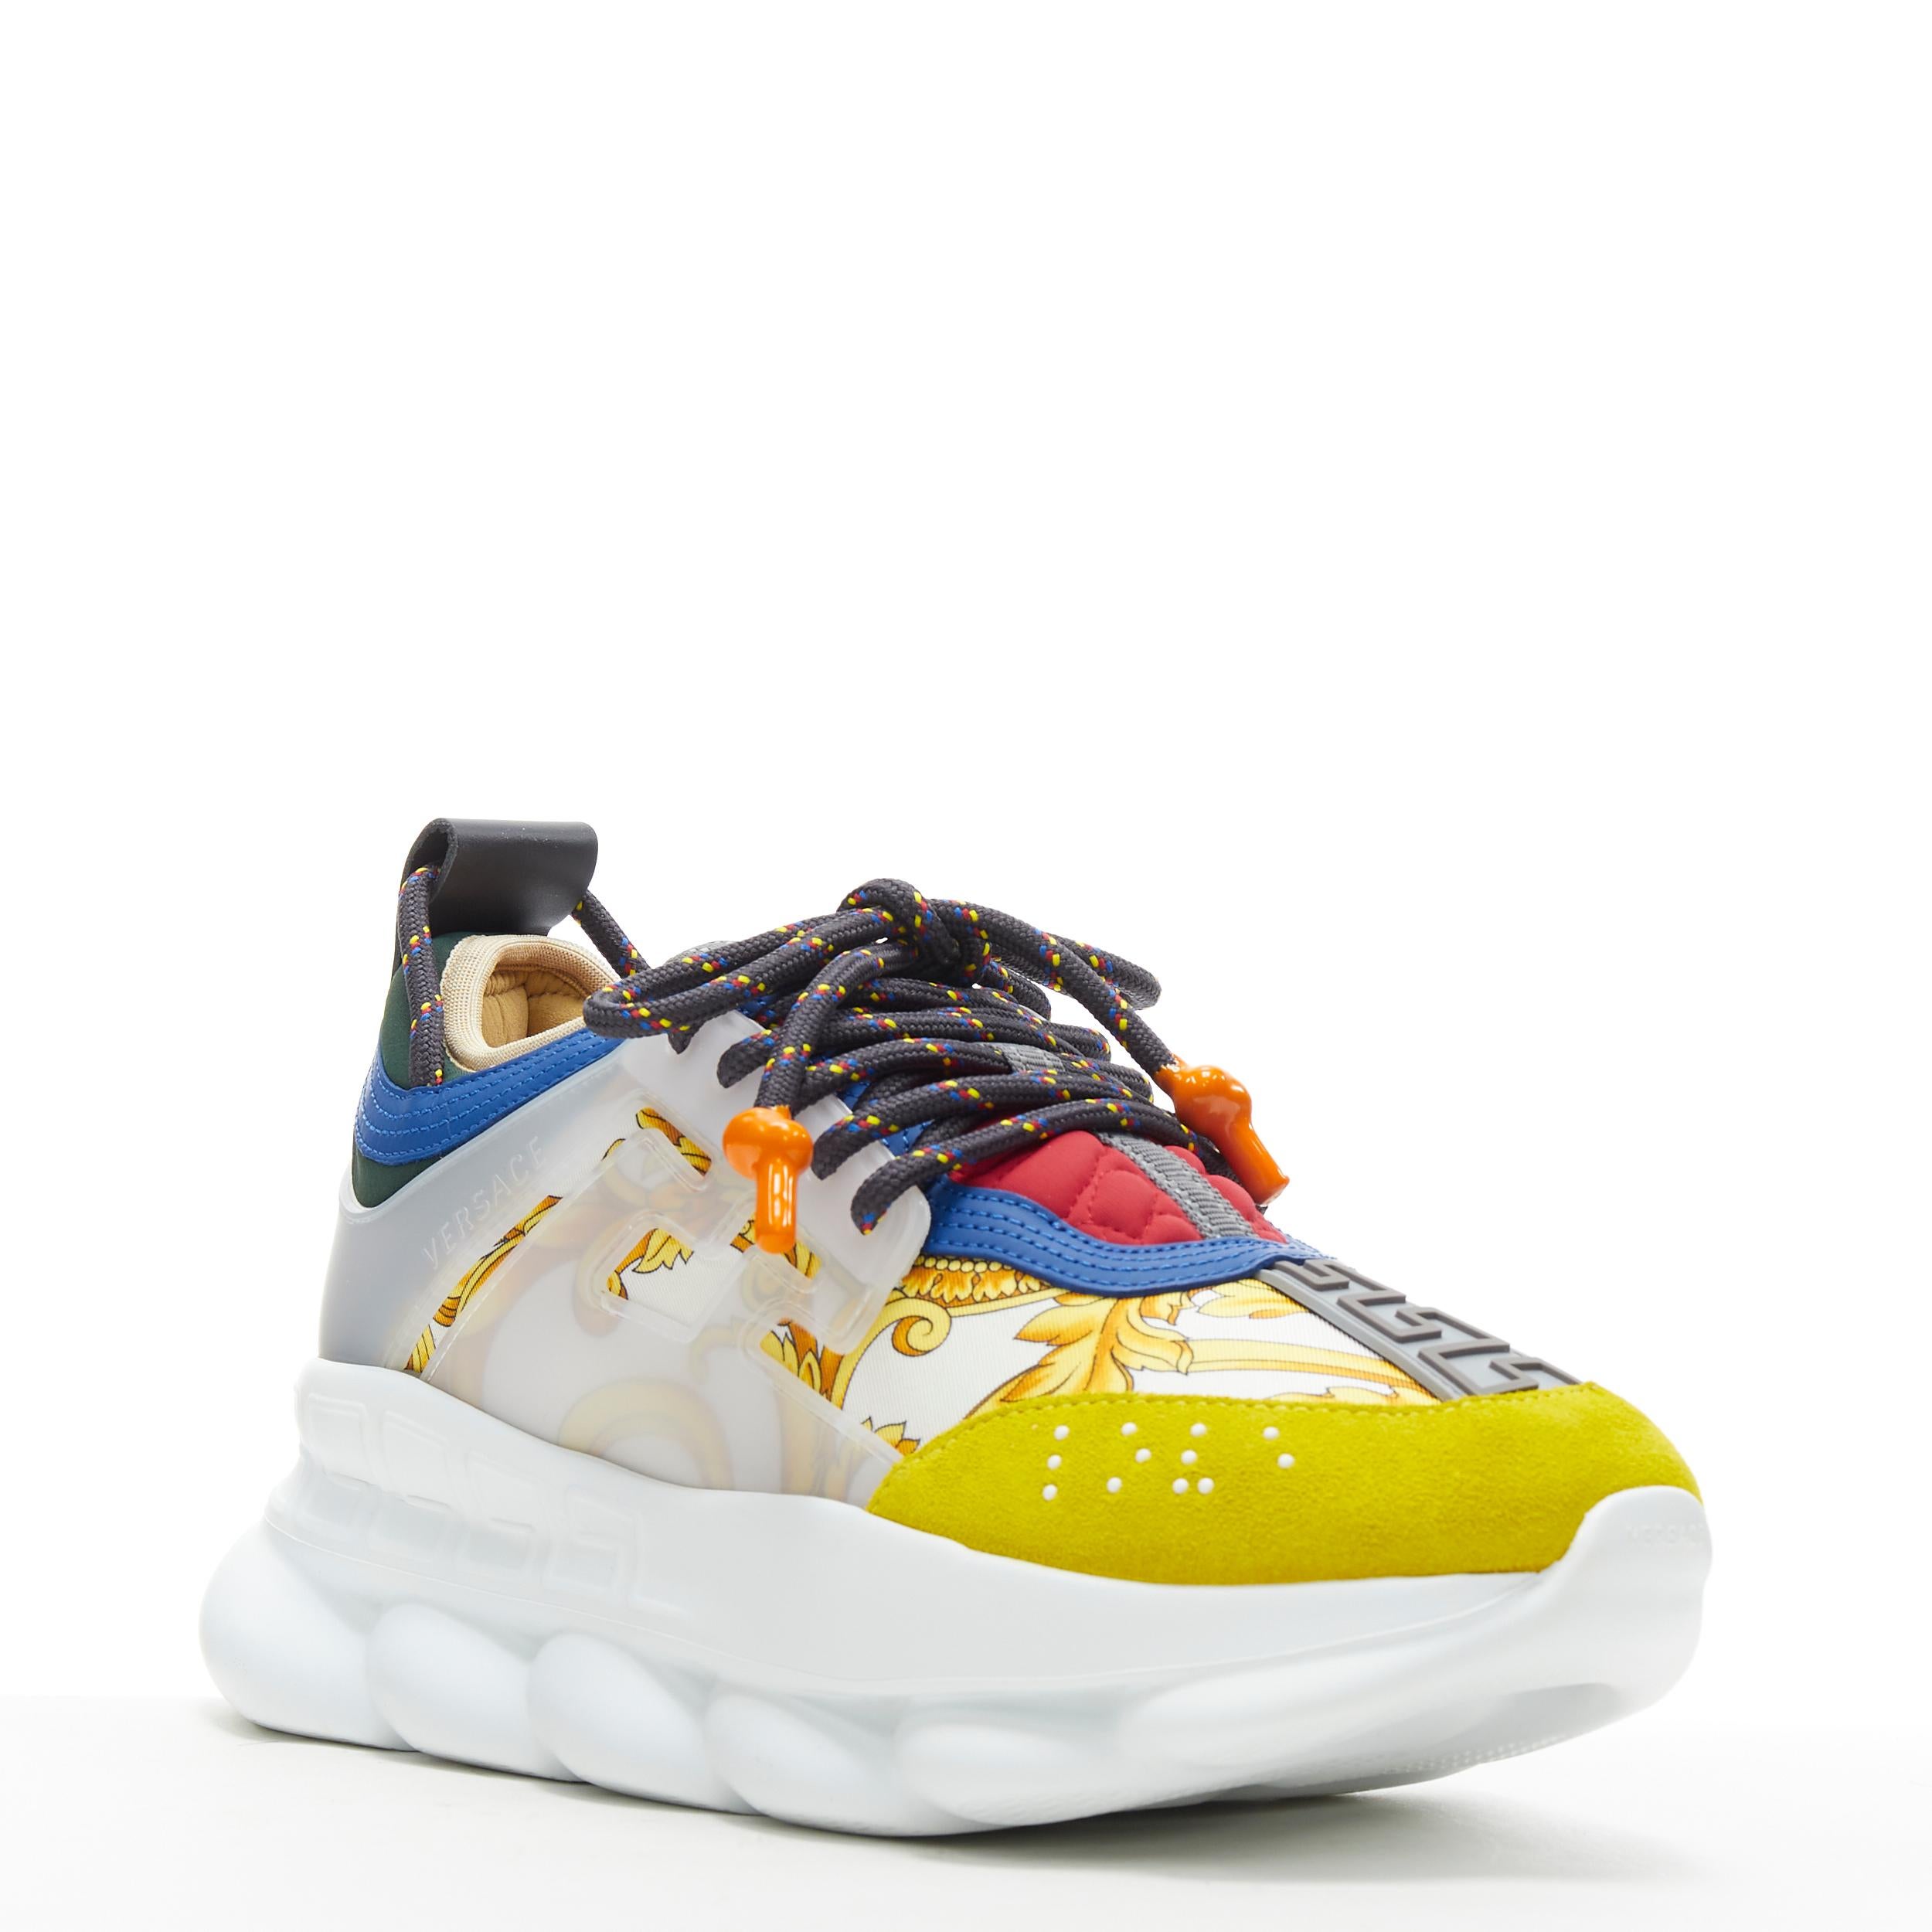 new VERSACE Chain Reaction gold barocco twill yellow blue suede sneaker EU42 US9 Reference: TGAS/B00765 
Brand: Versace 
Designer: Salehe Bembury 
Model: Chain Reaction White Barocco 
Material: Leather 
Color: Gold 
Pattern: Solid 
Closure: Lace up